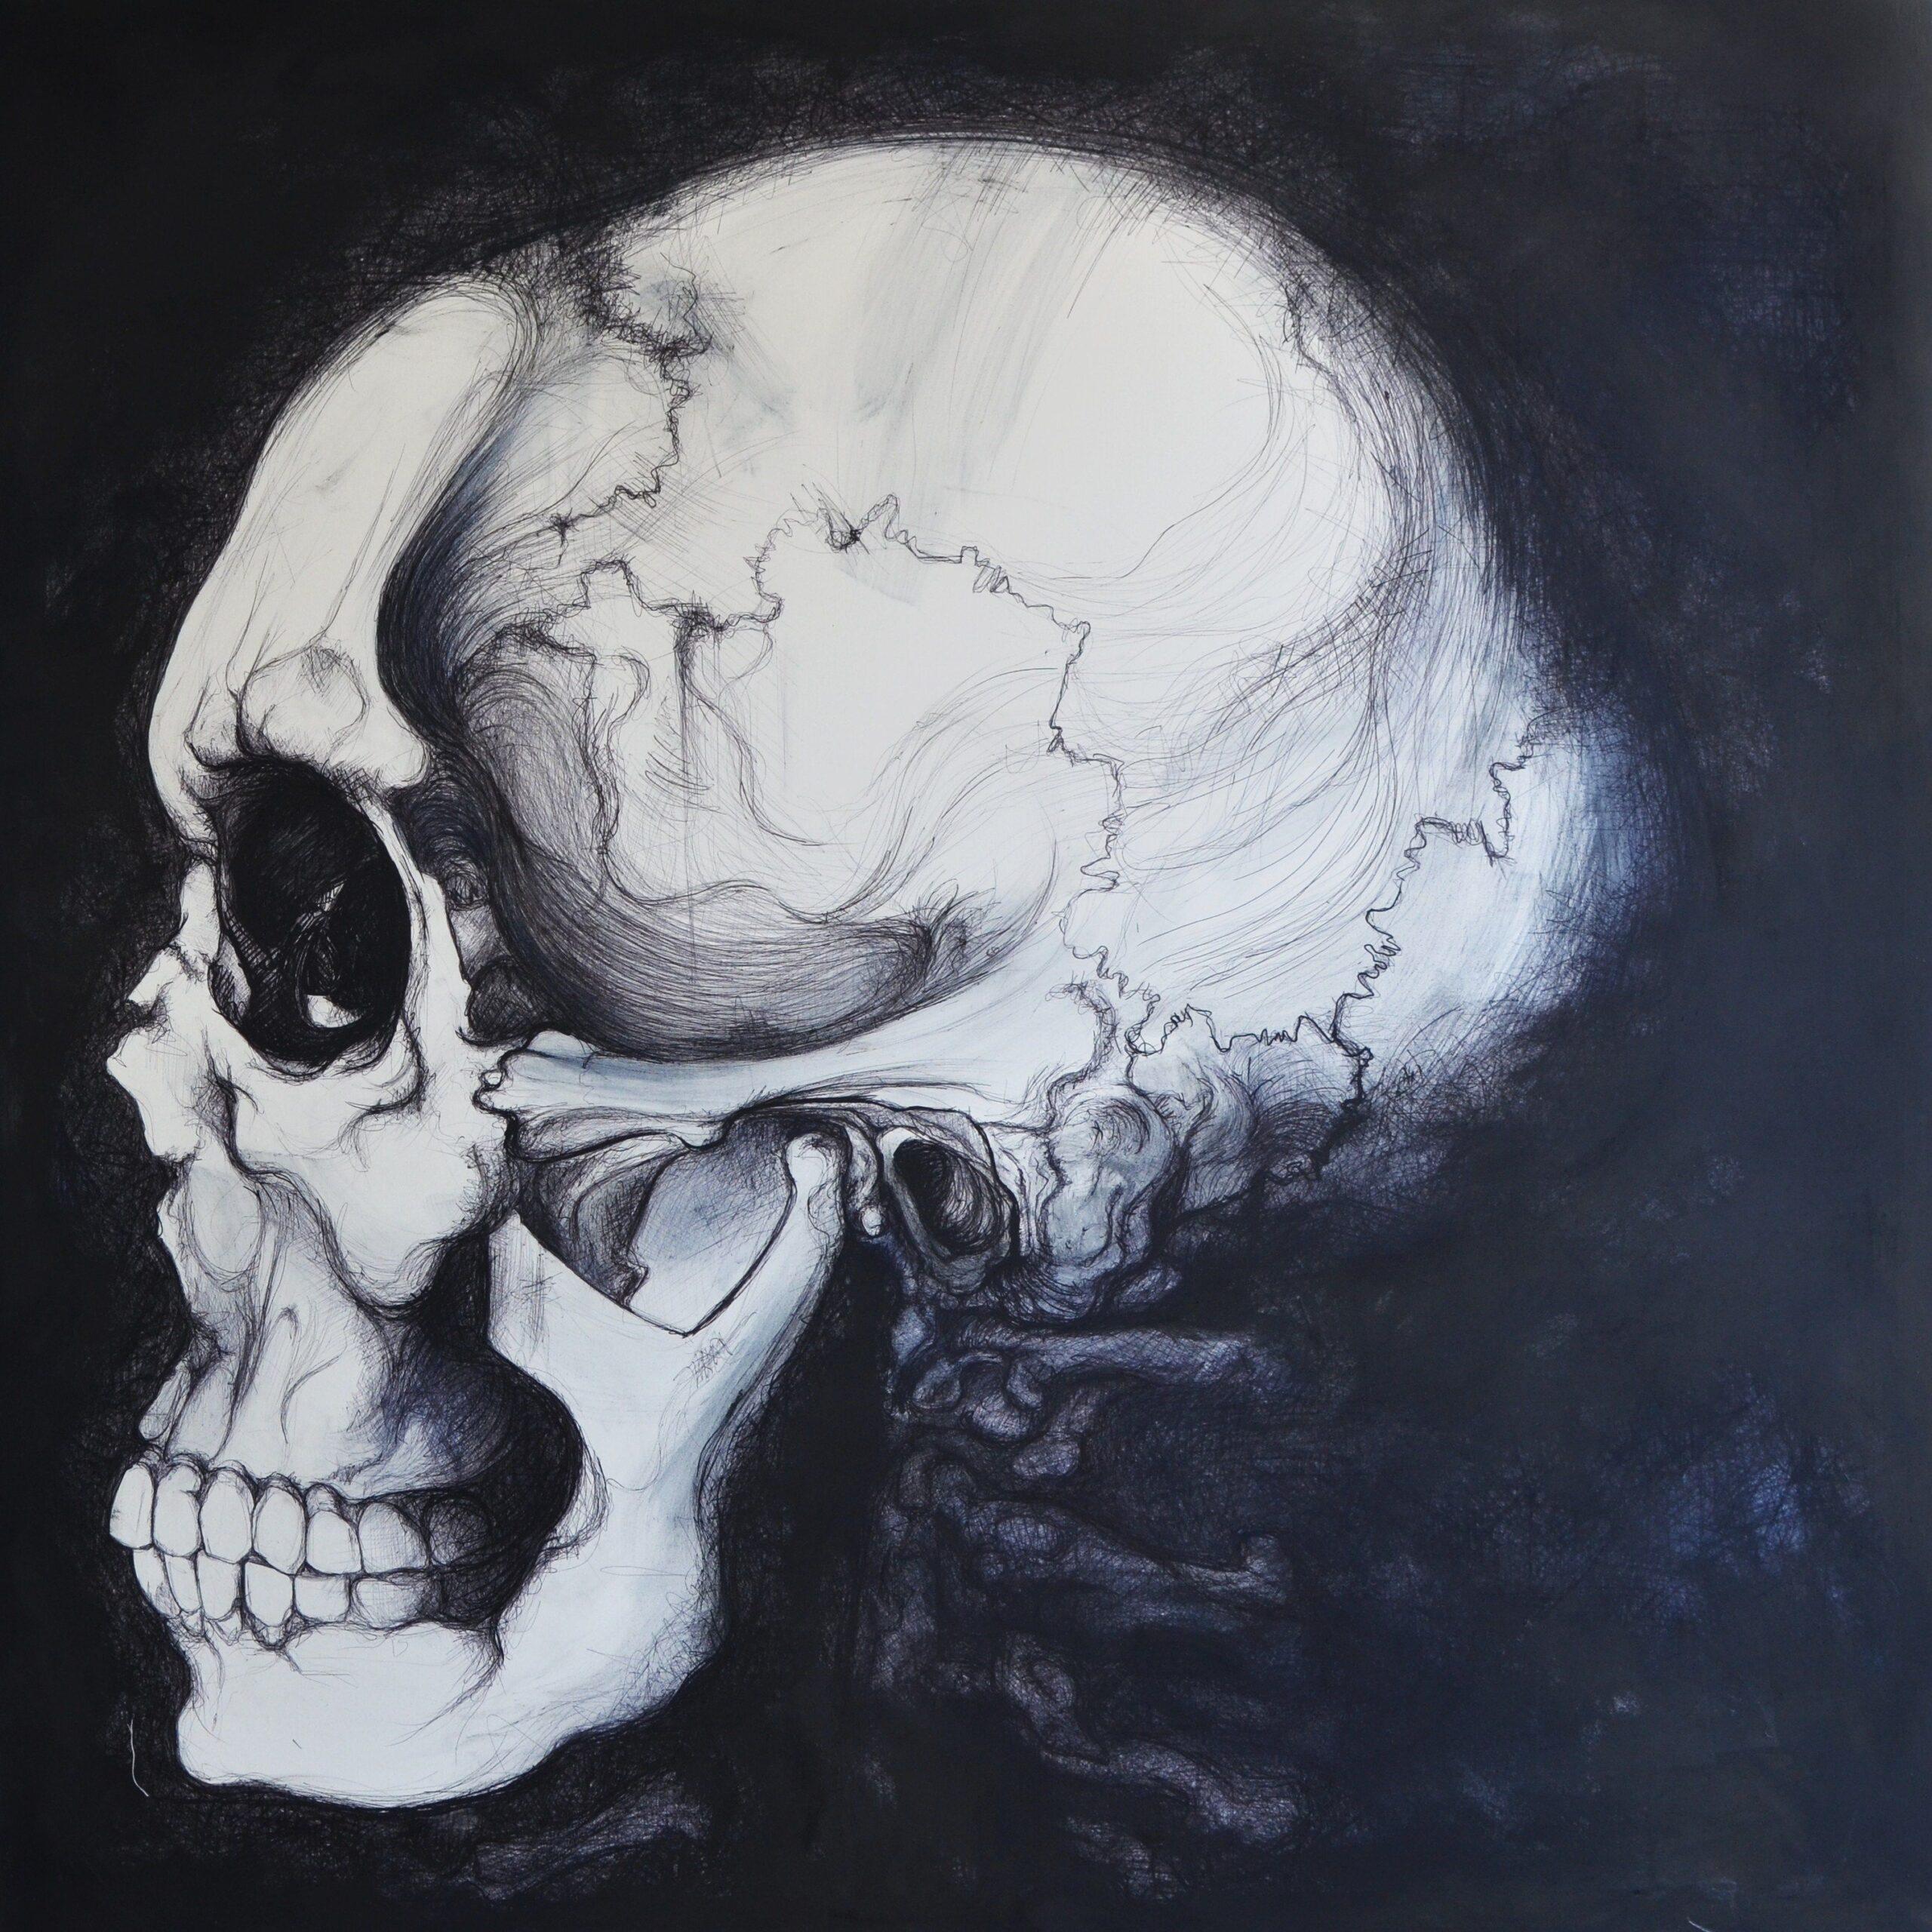 Van.I.T II by Cécile Bisciglia - Ballpoint pen drawing on canvas, scull, dark